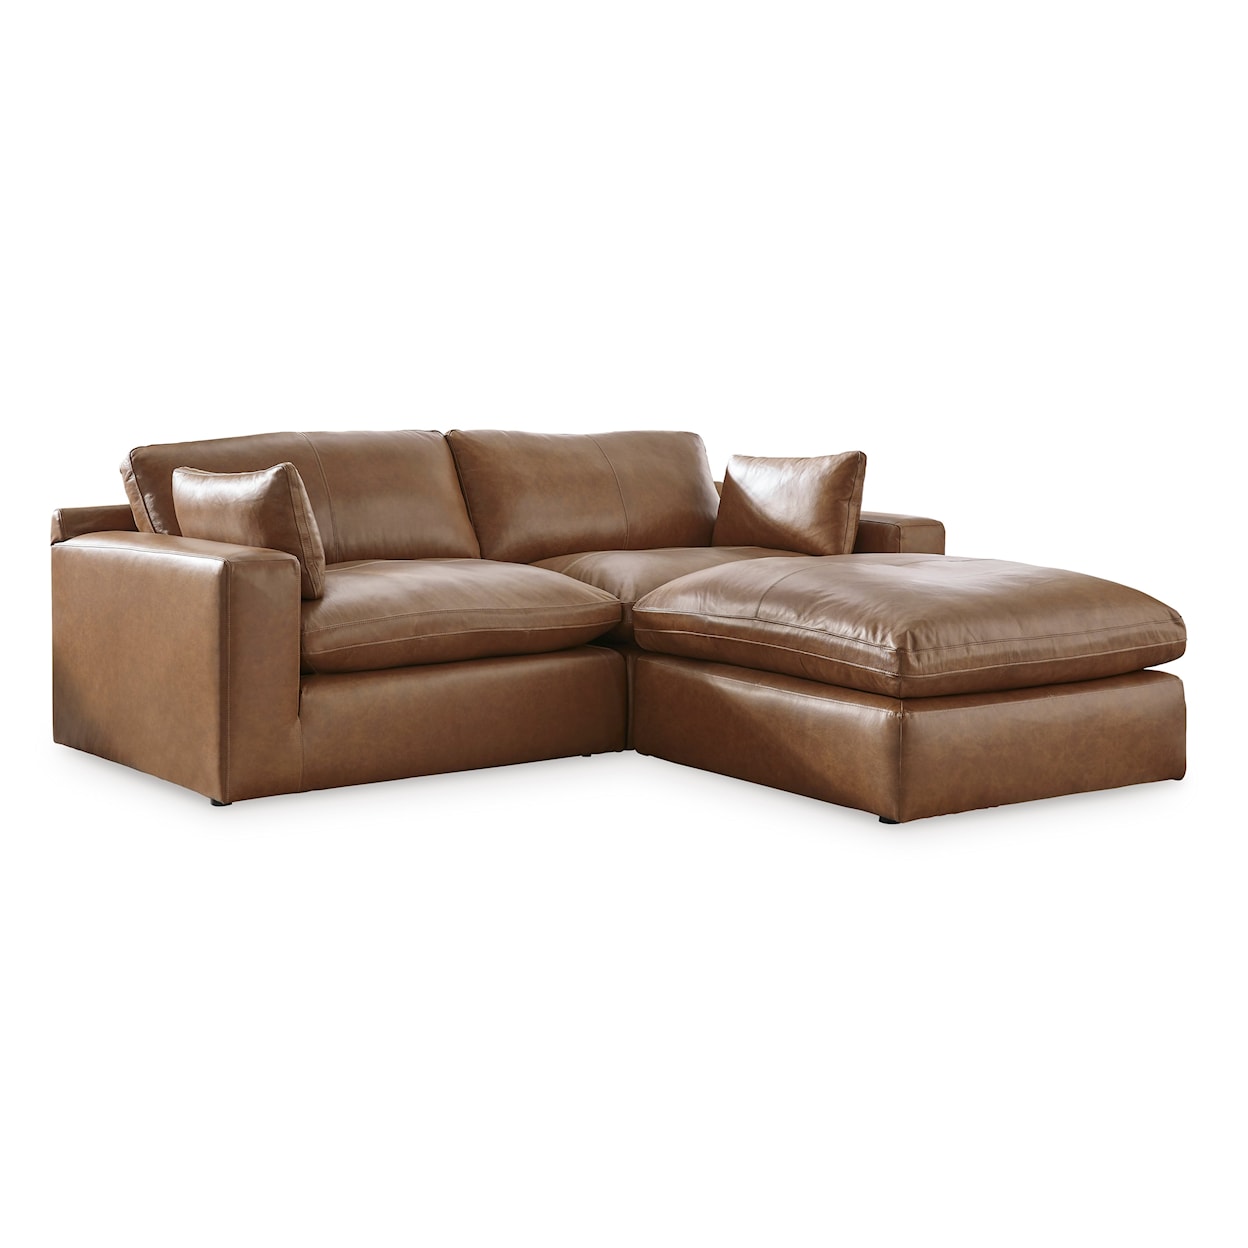 Signature Design by Ashley Emilia Leather Match Modular Sectional with Ottoman